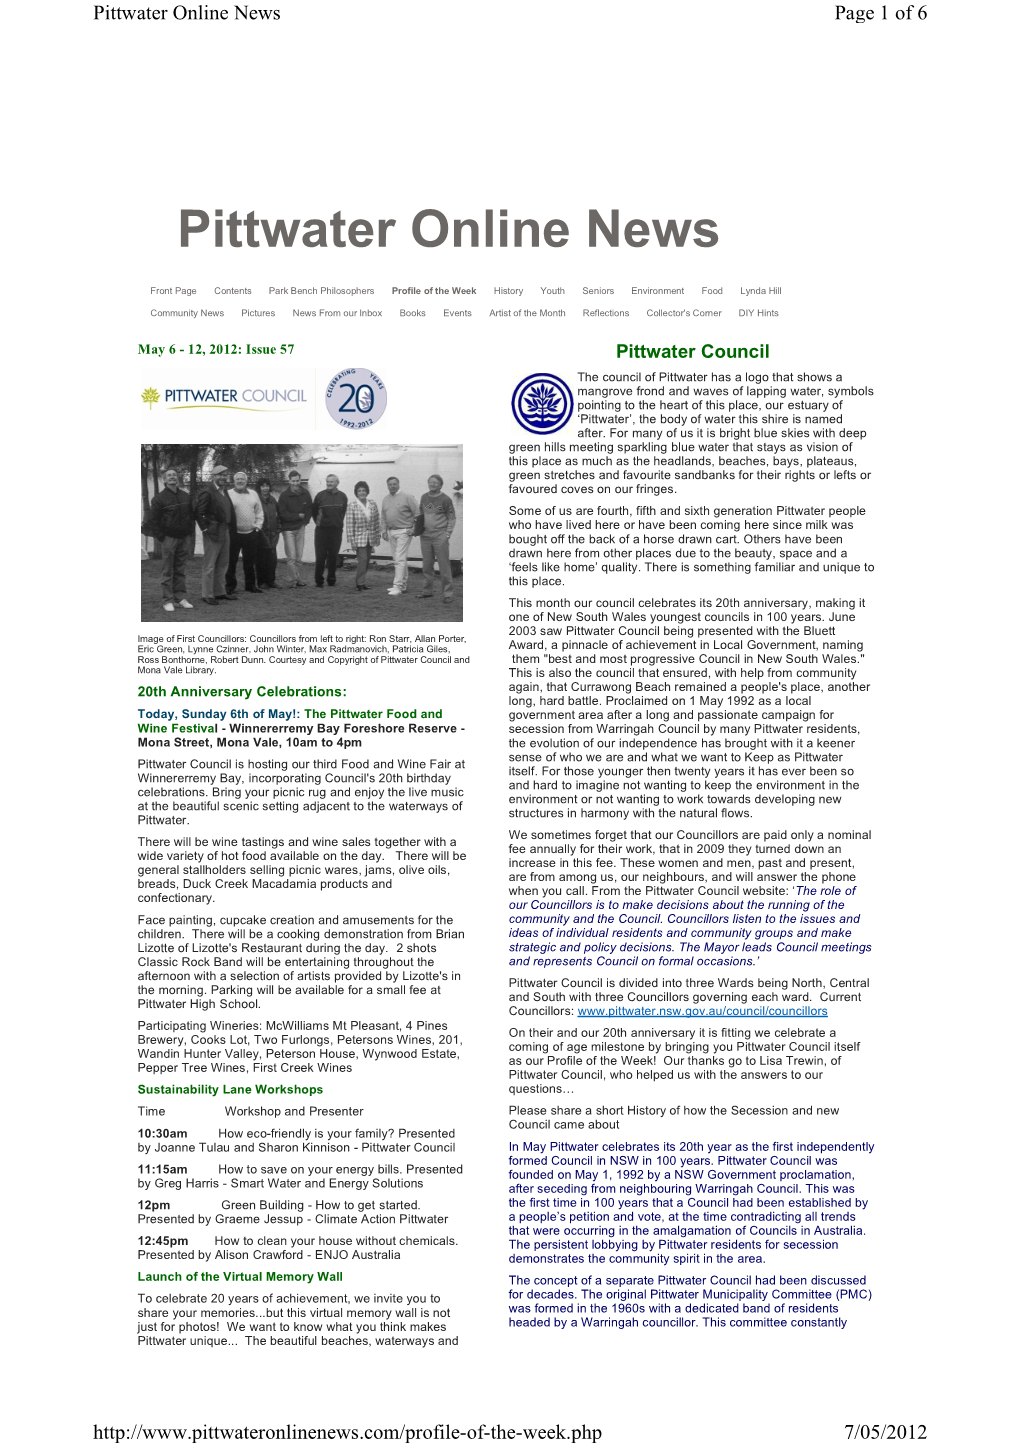 Pittwater Online News Archives